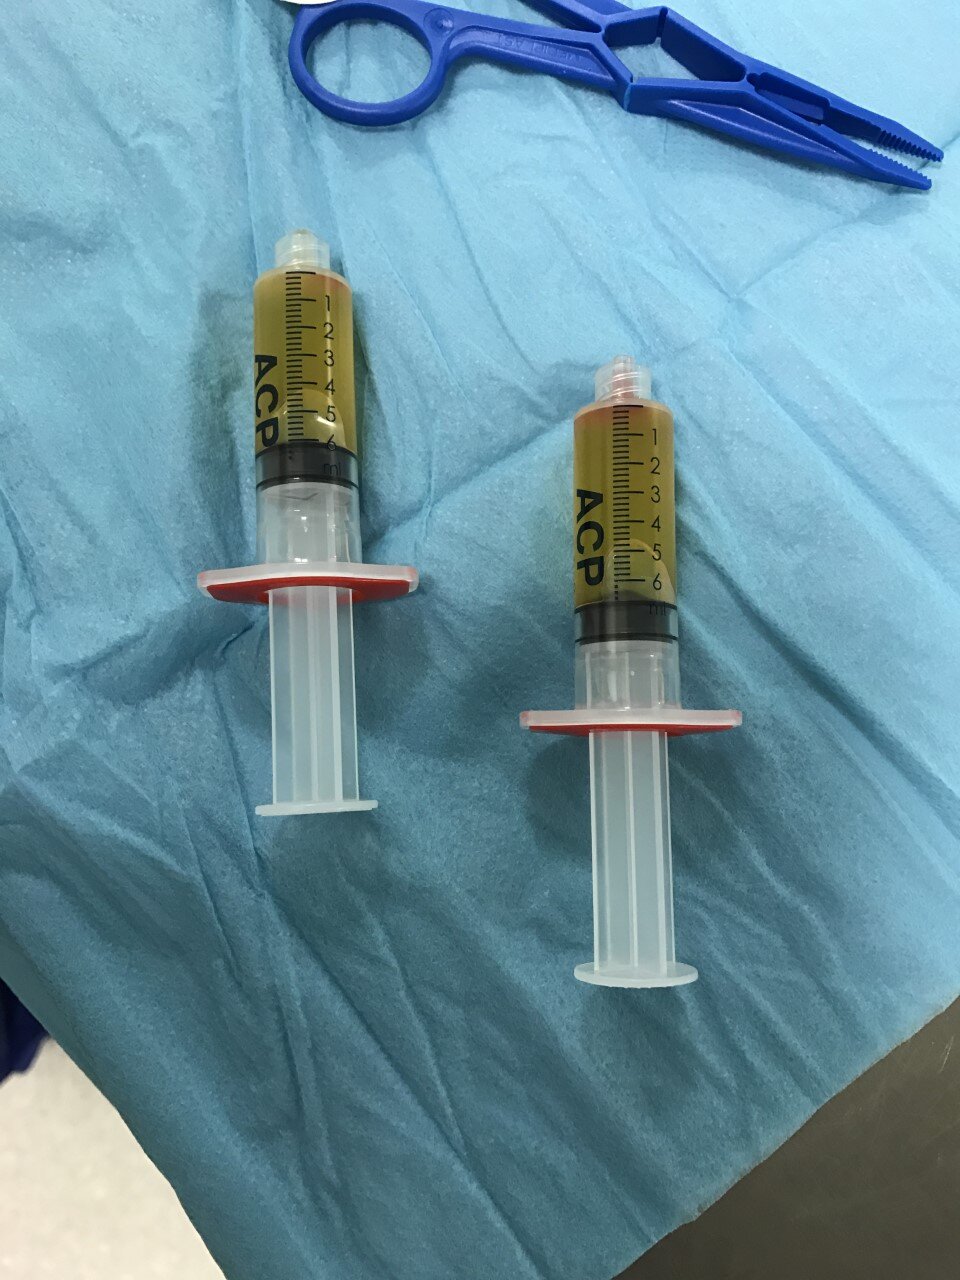 5. Platelet Rich Plasma Ready For Injection